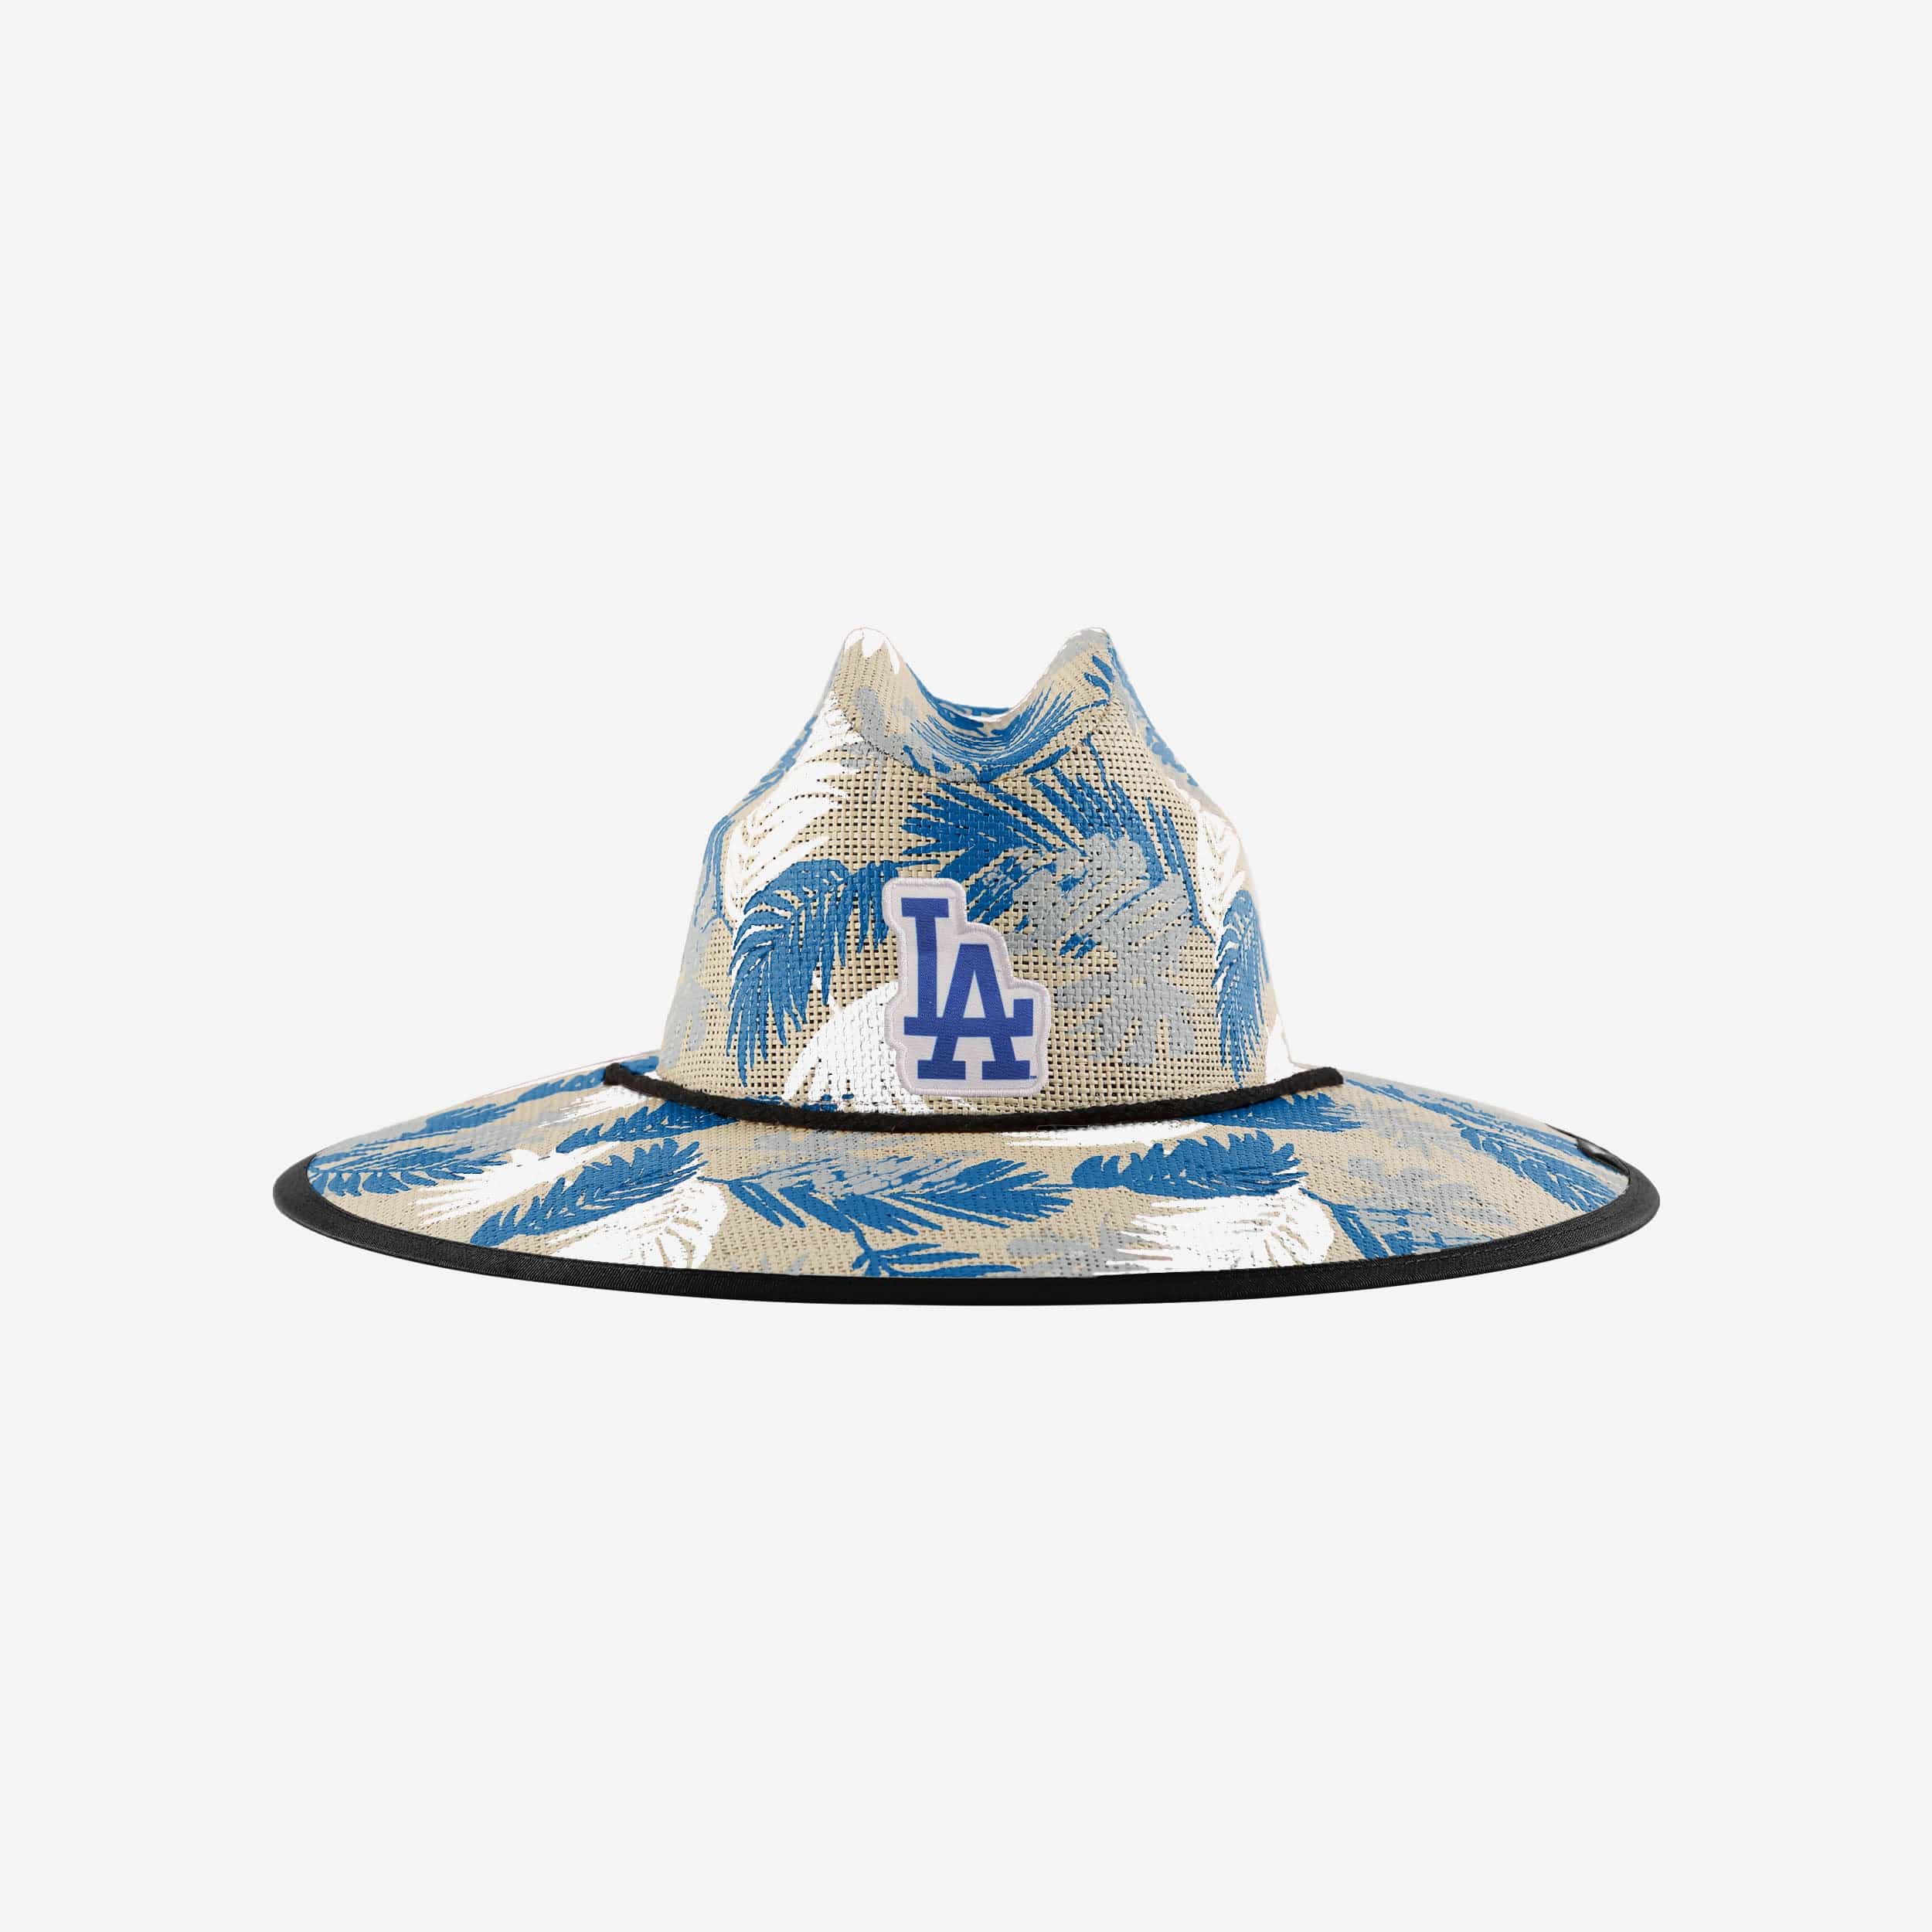 FOCO Starts The New Year Off With A LA Dodgers Exclusive